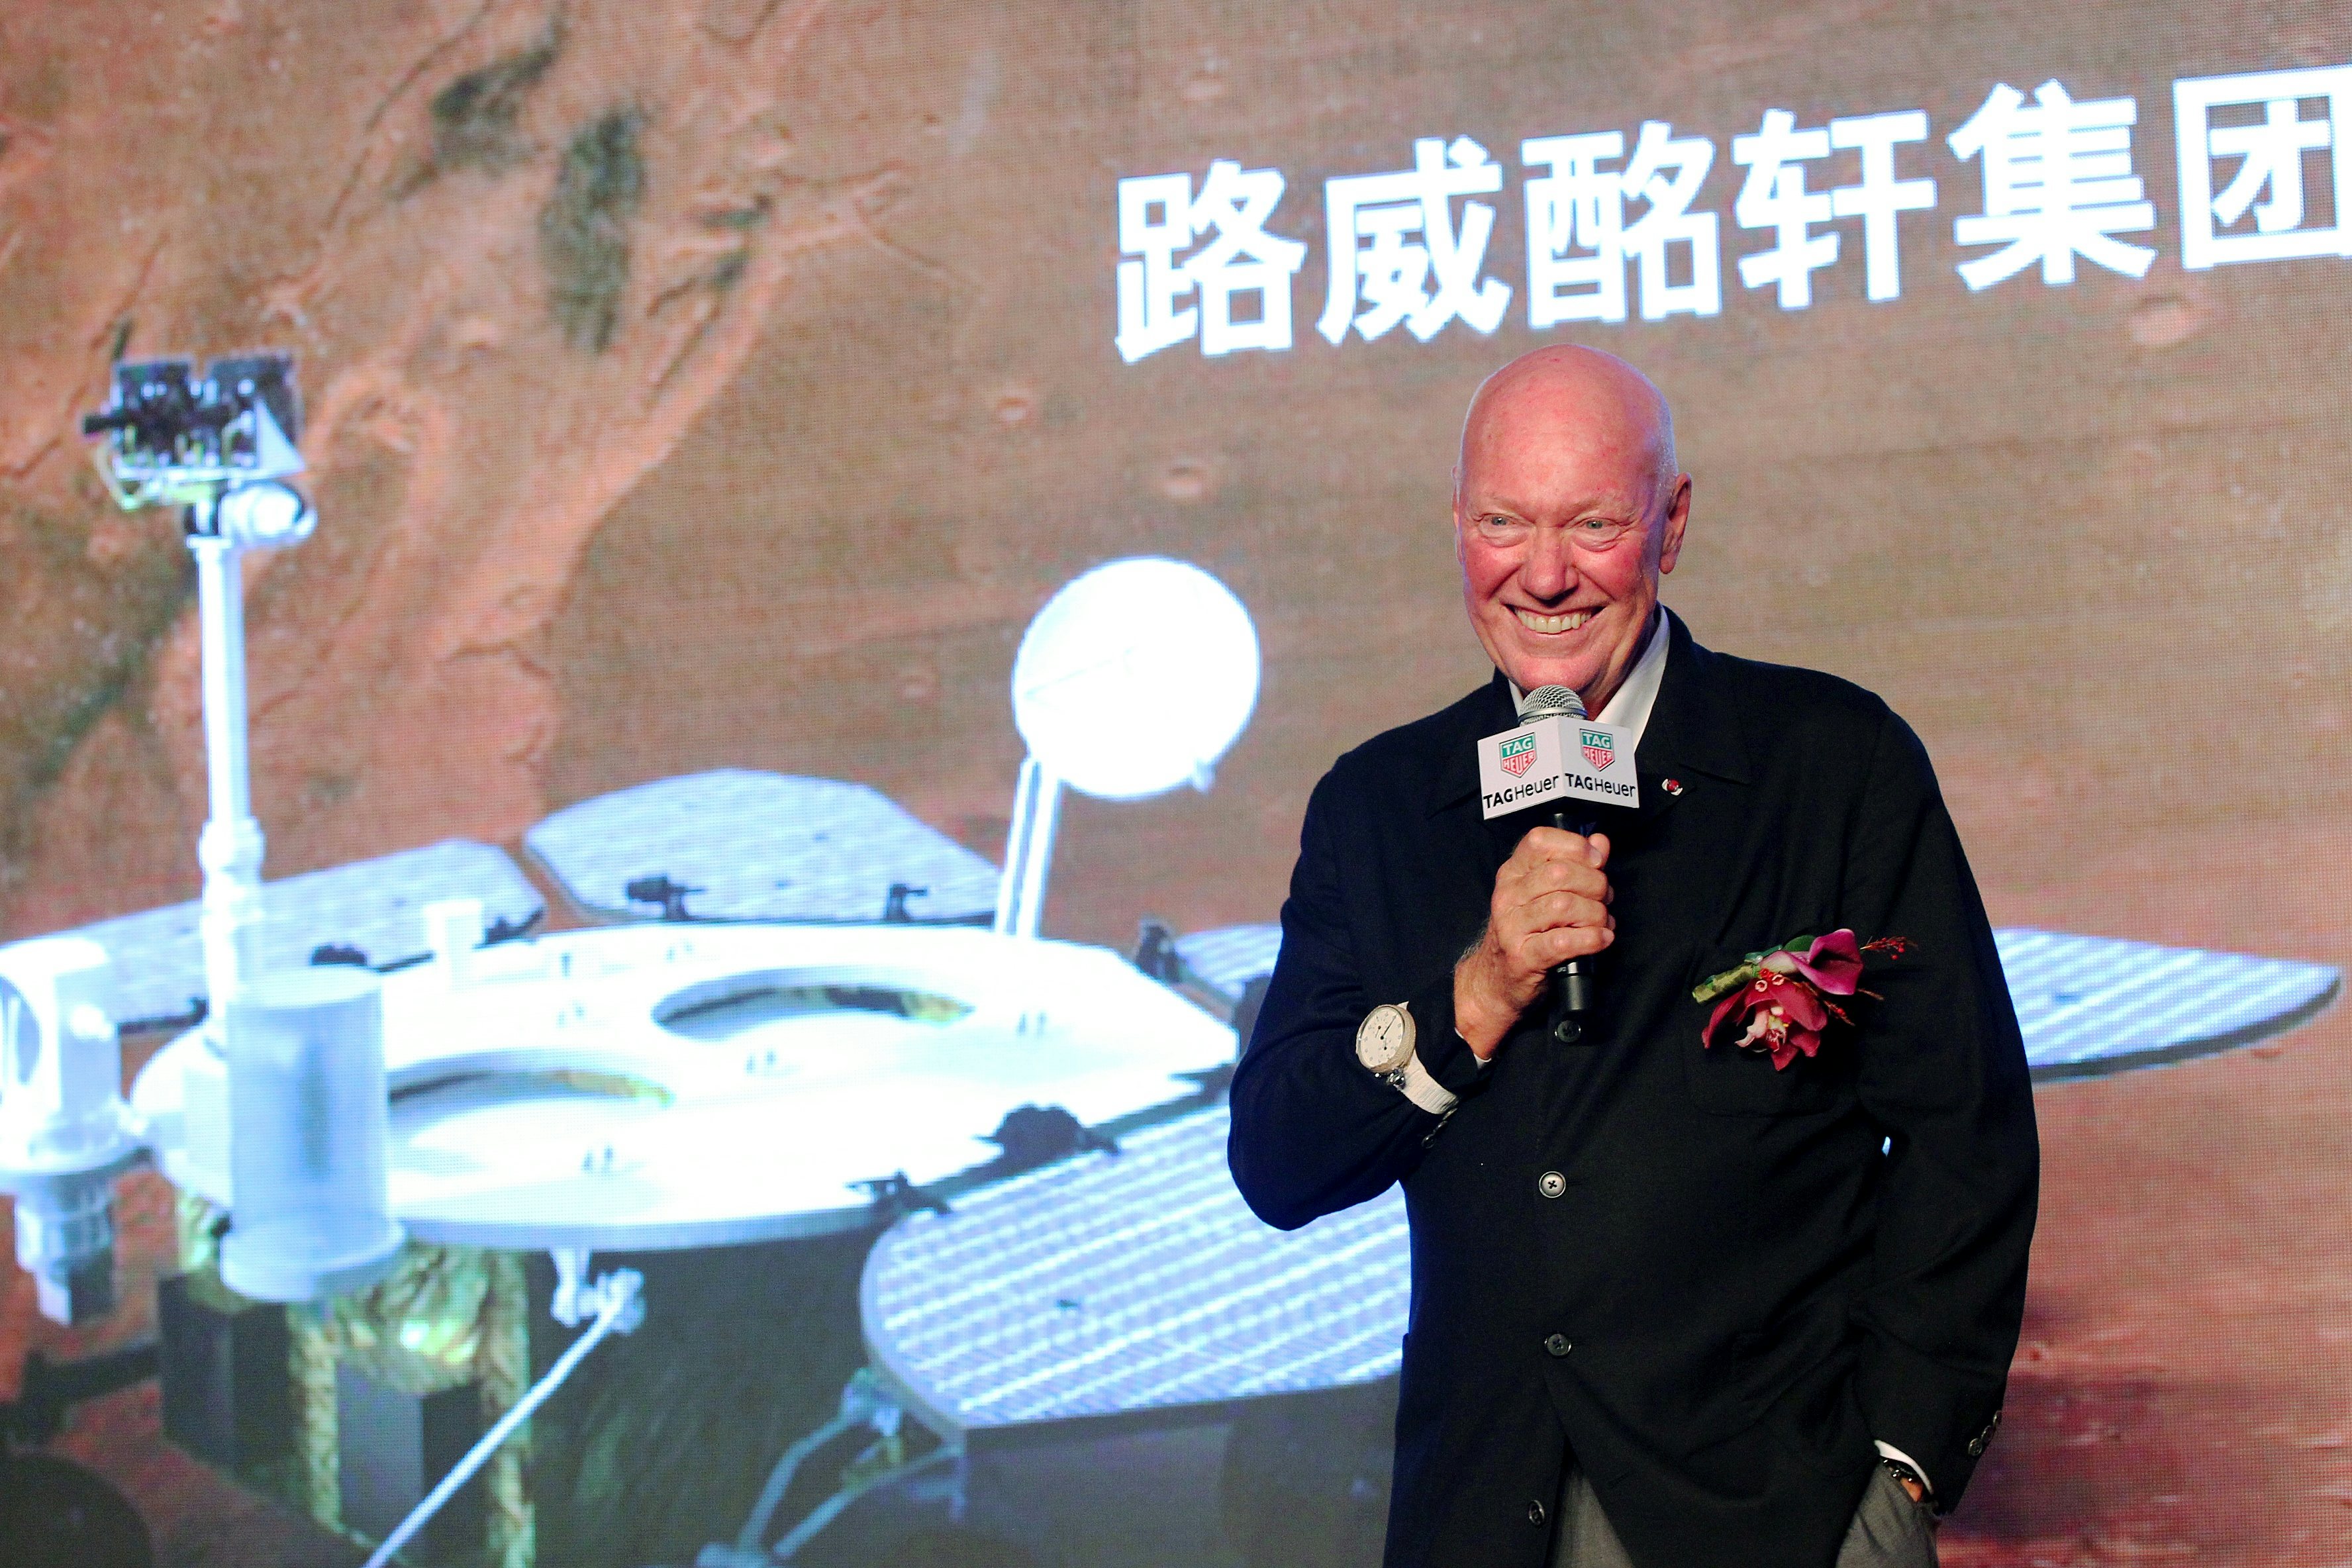 Jean-Claude Biver at an event celebrating TAG Heuer's selection as the official timekeeper of China’s Mars Exploration Program. (Courtesy Photo)